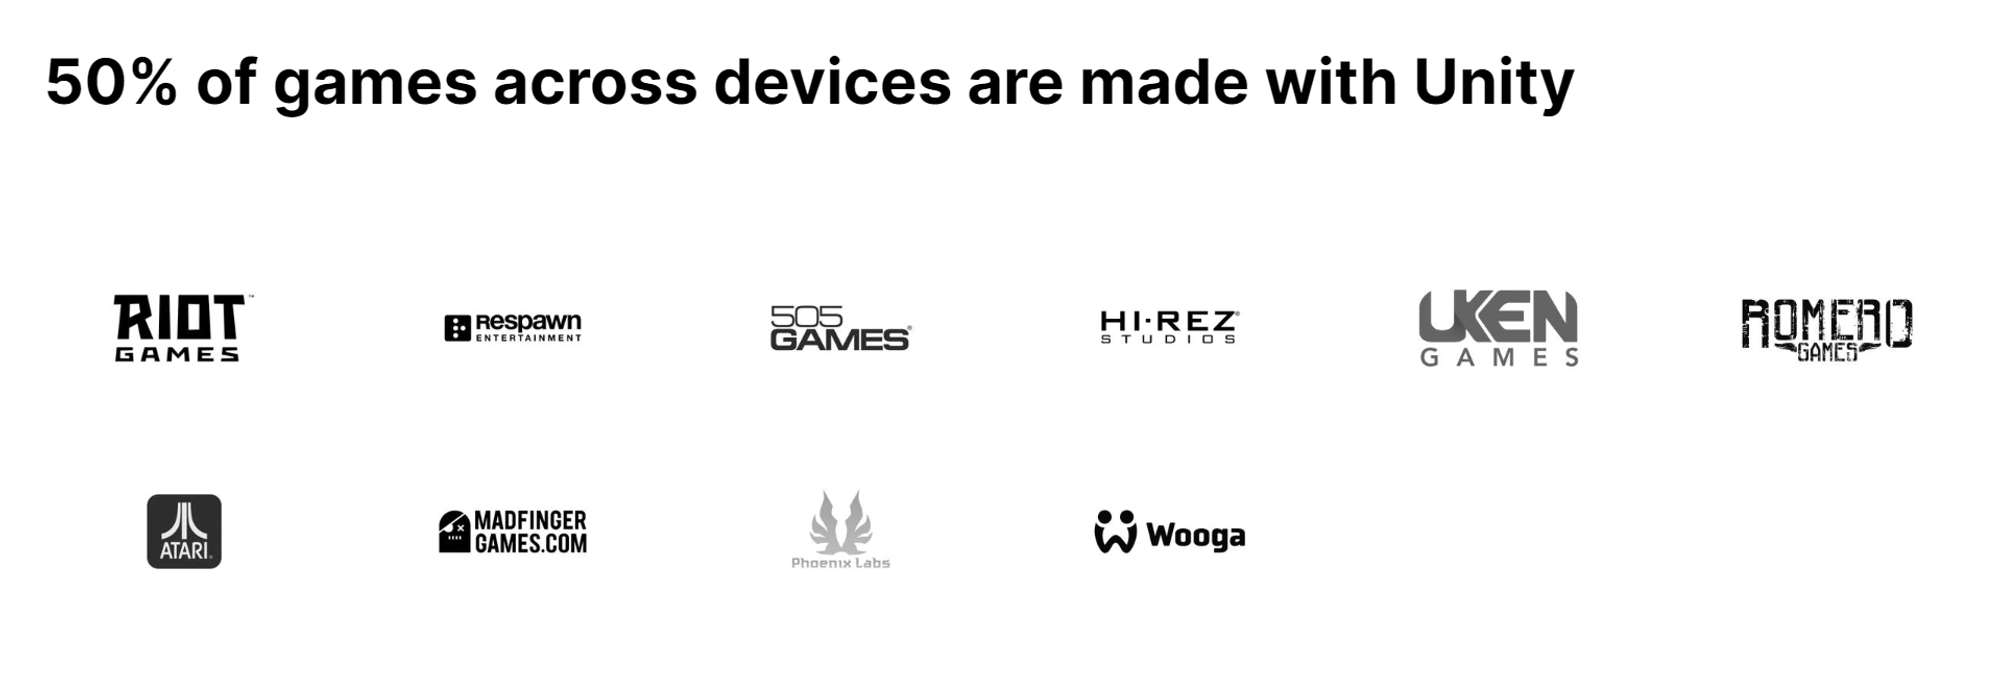 Unity became the most popular game engine across all devices